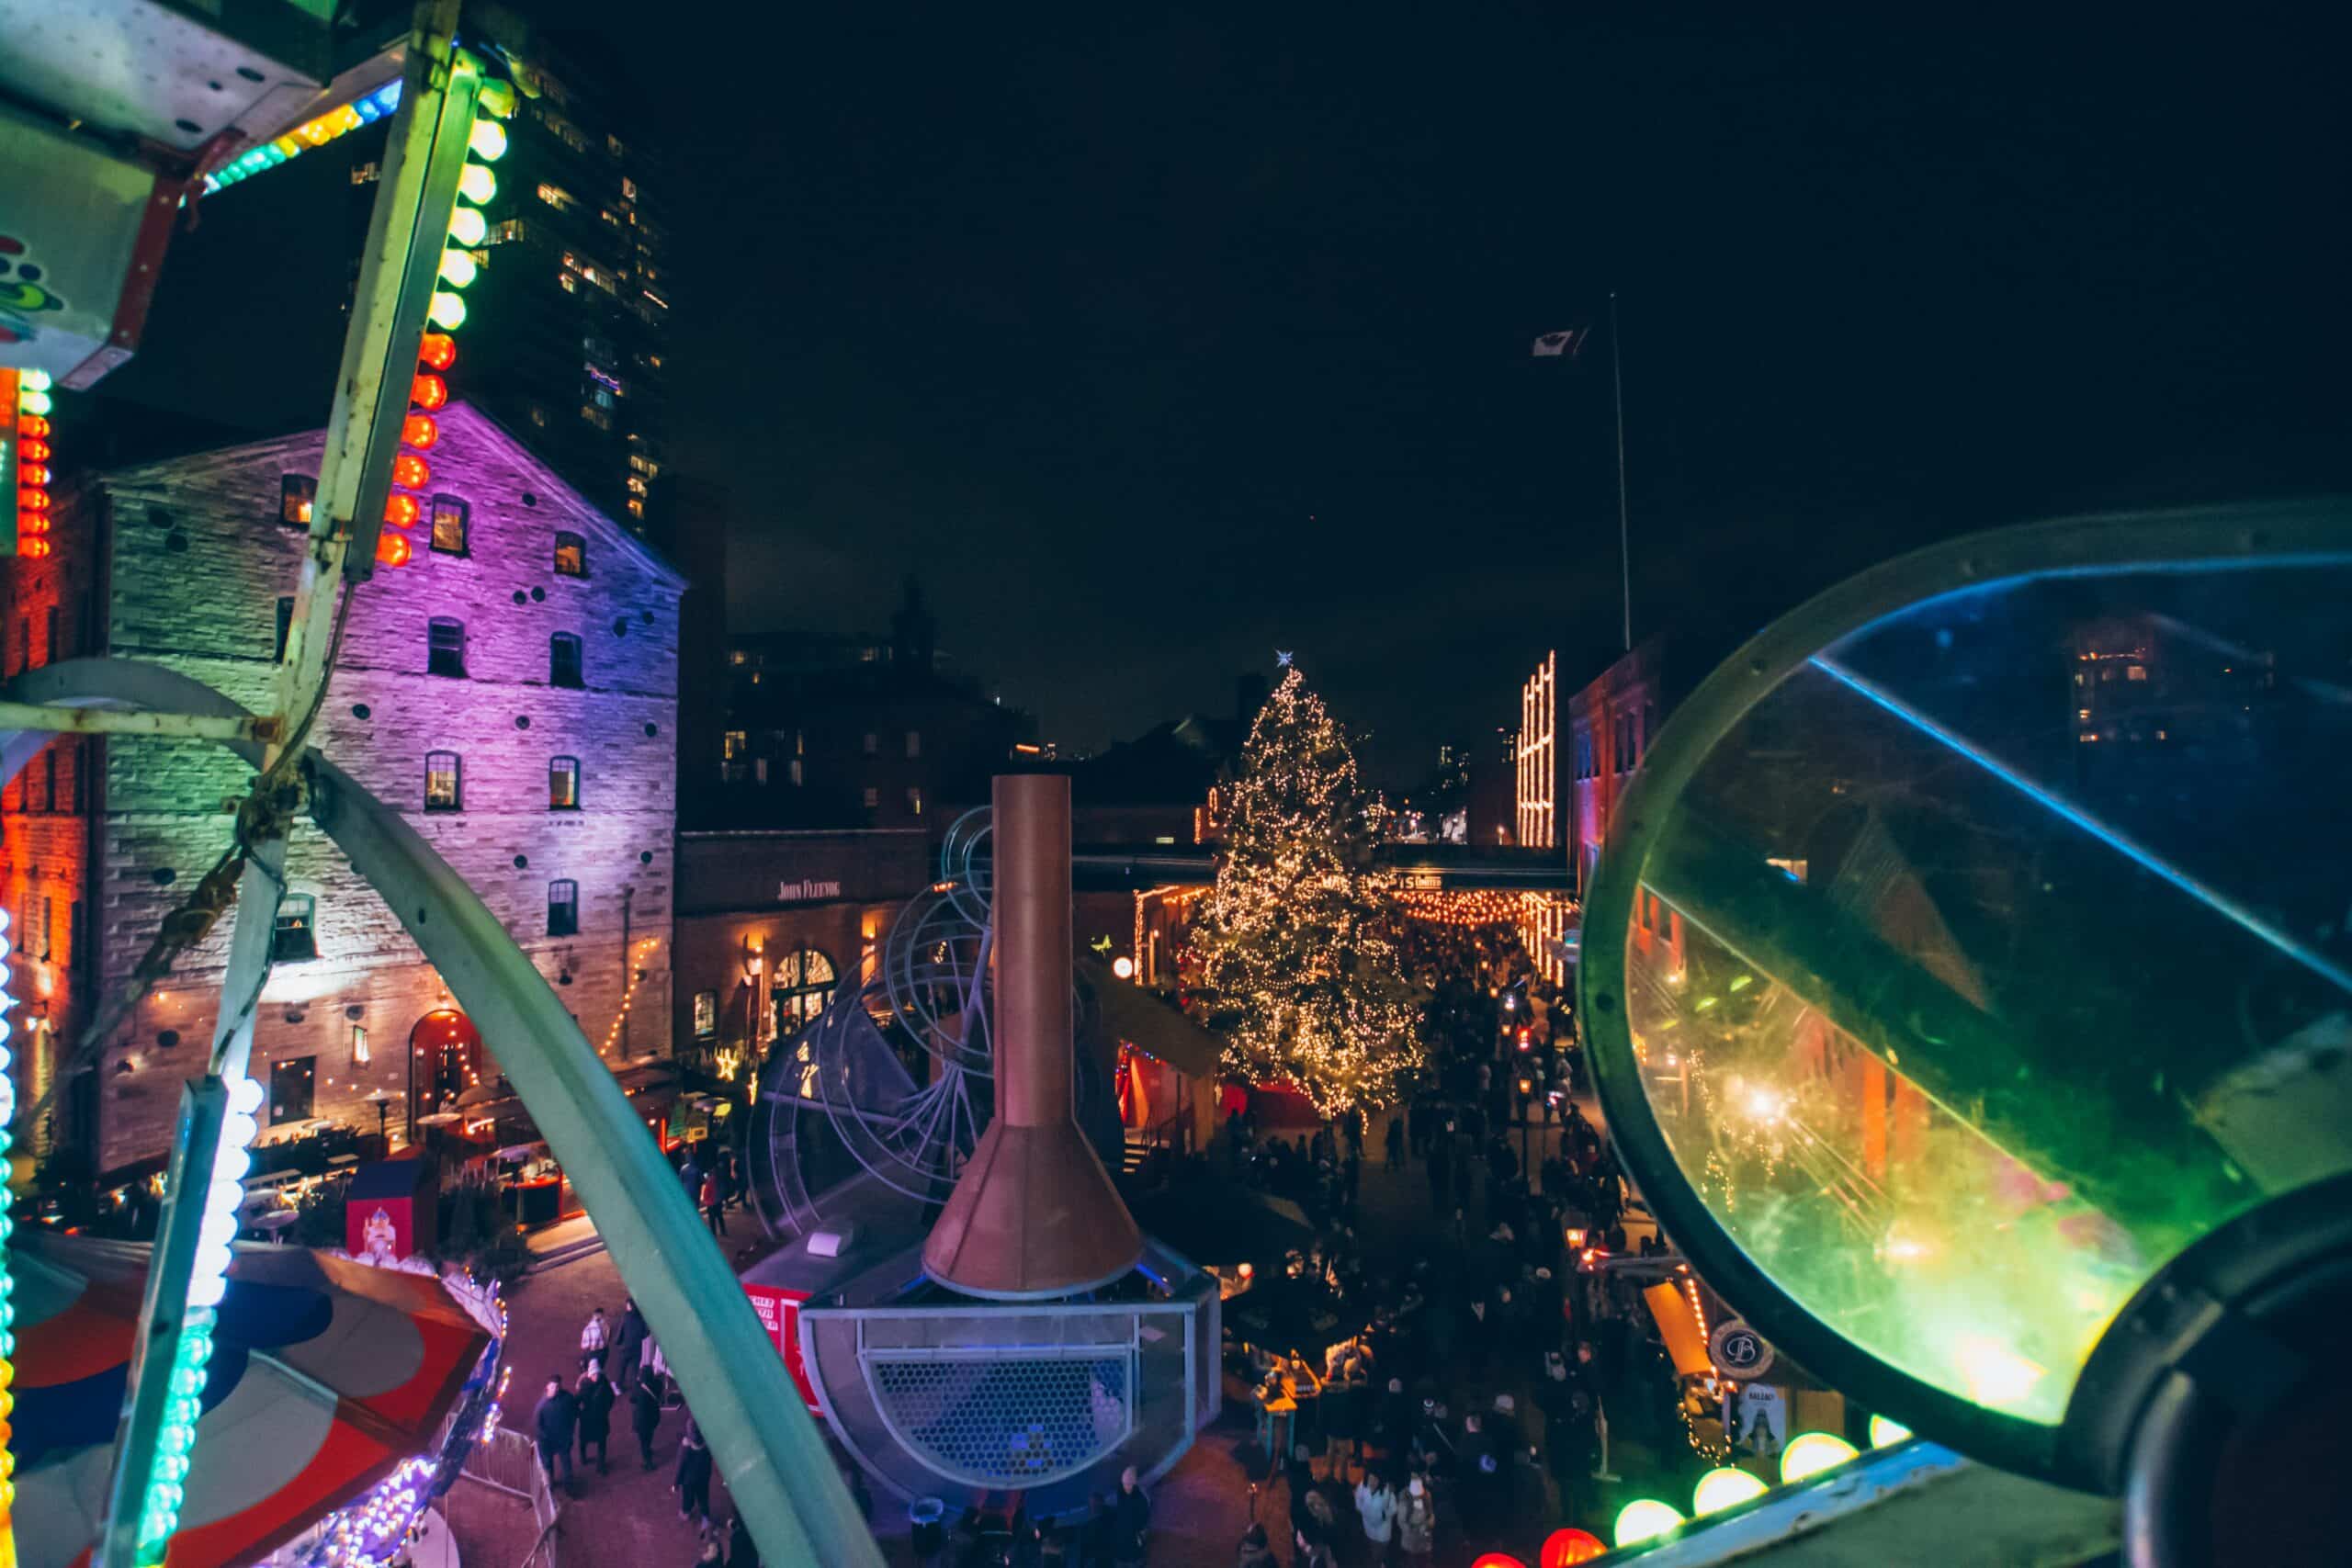 Hotel Victoria - Your Guide To The Toronto Christmas Market